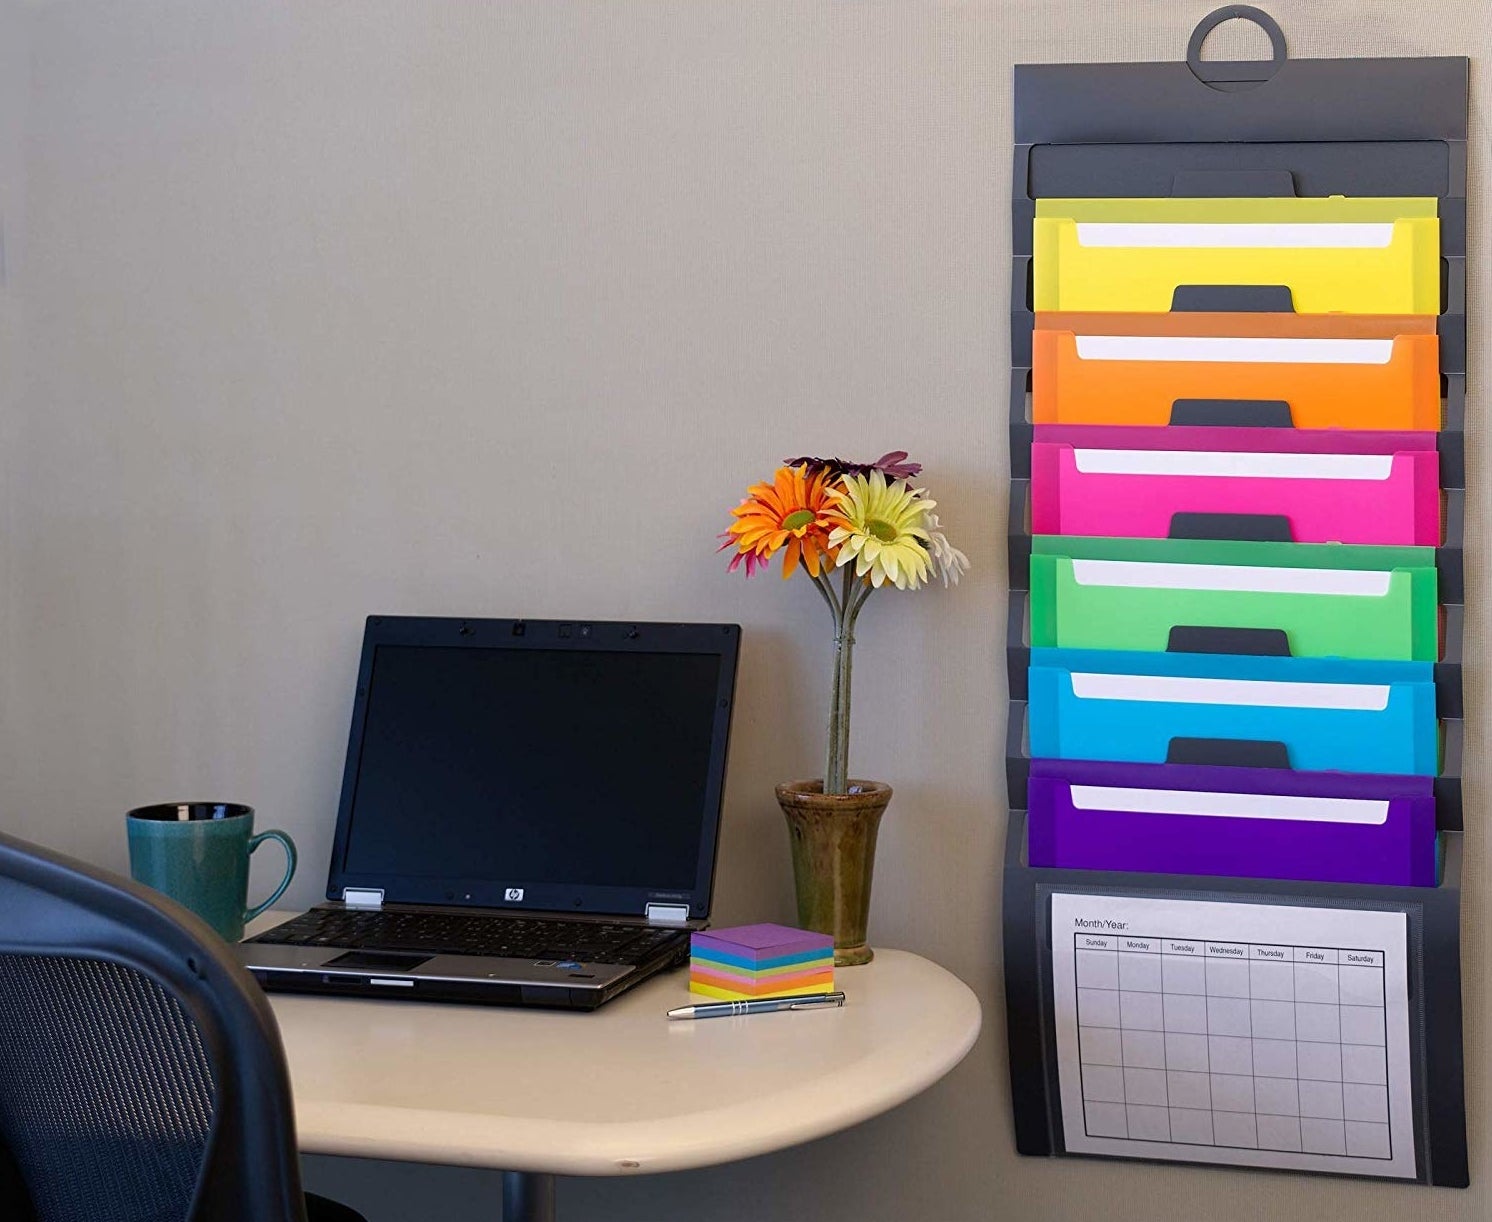 A vertical file folder hanging from the wall next to a table with a laptop